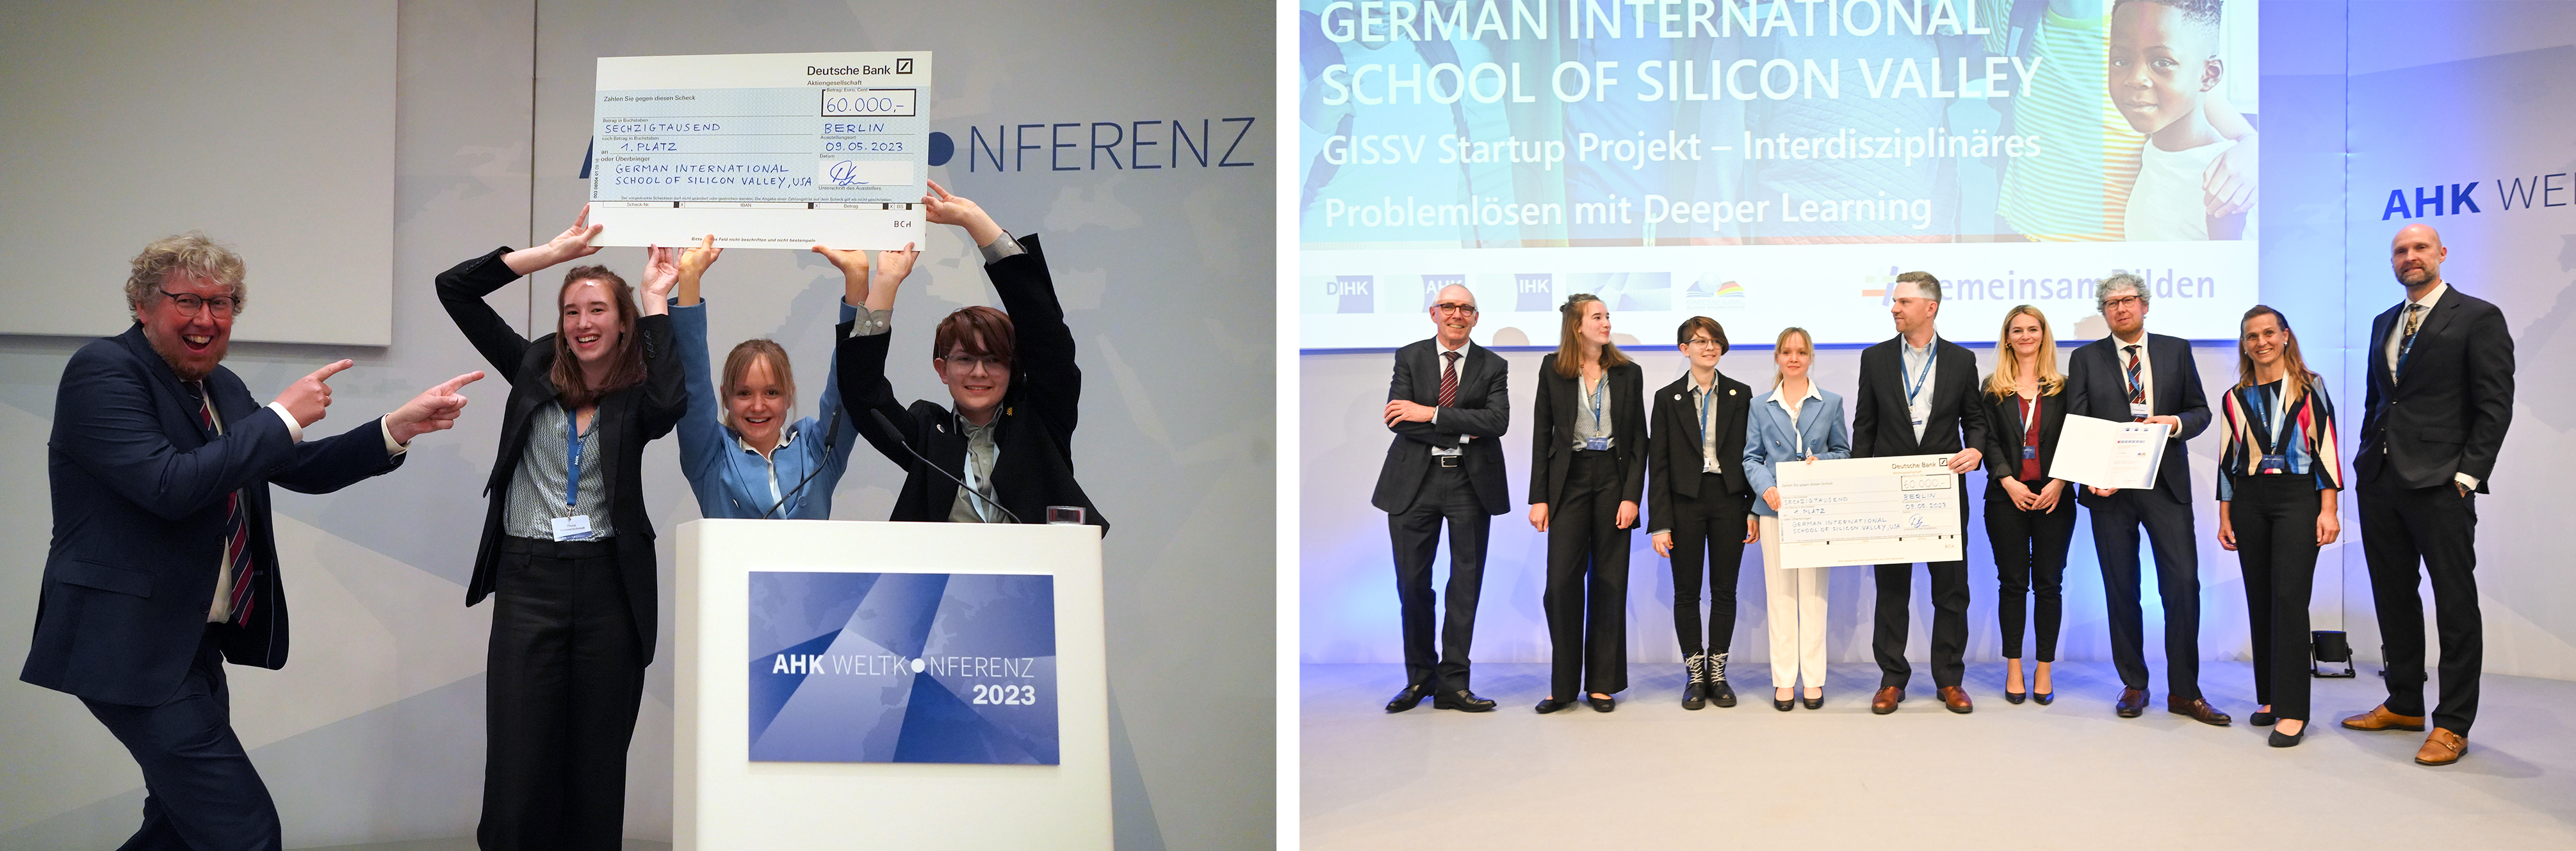 German International School of Silicon Valley (GISSV), Thursday, May 11, 2023, Press release picture